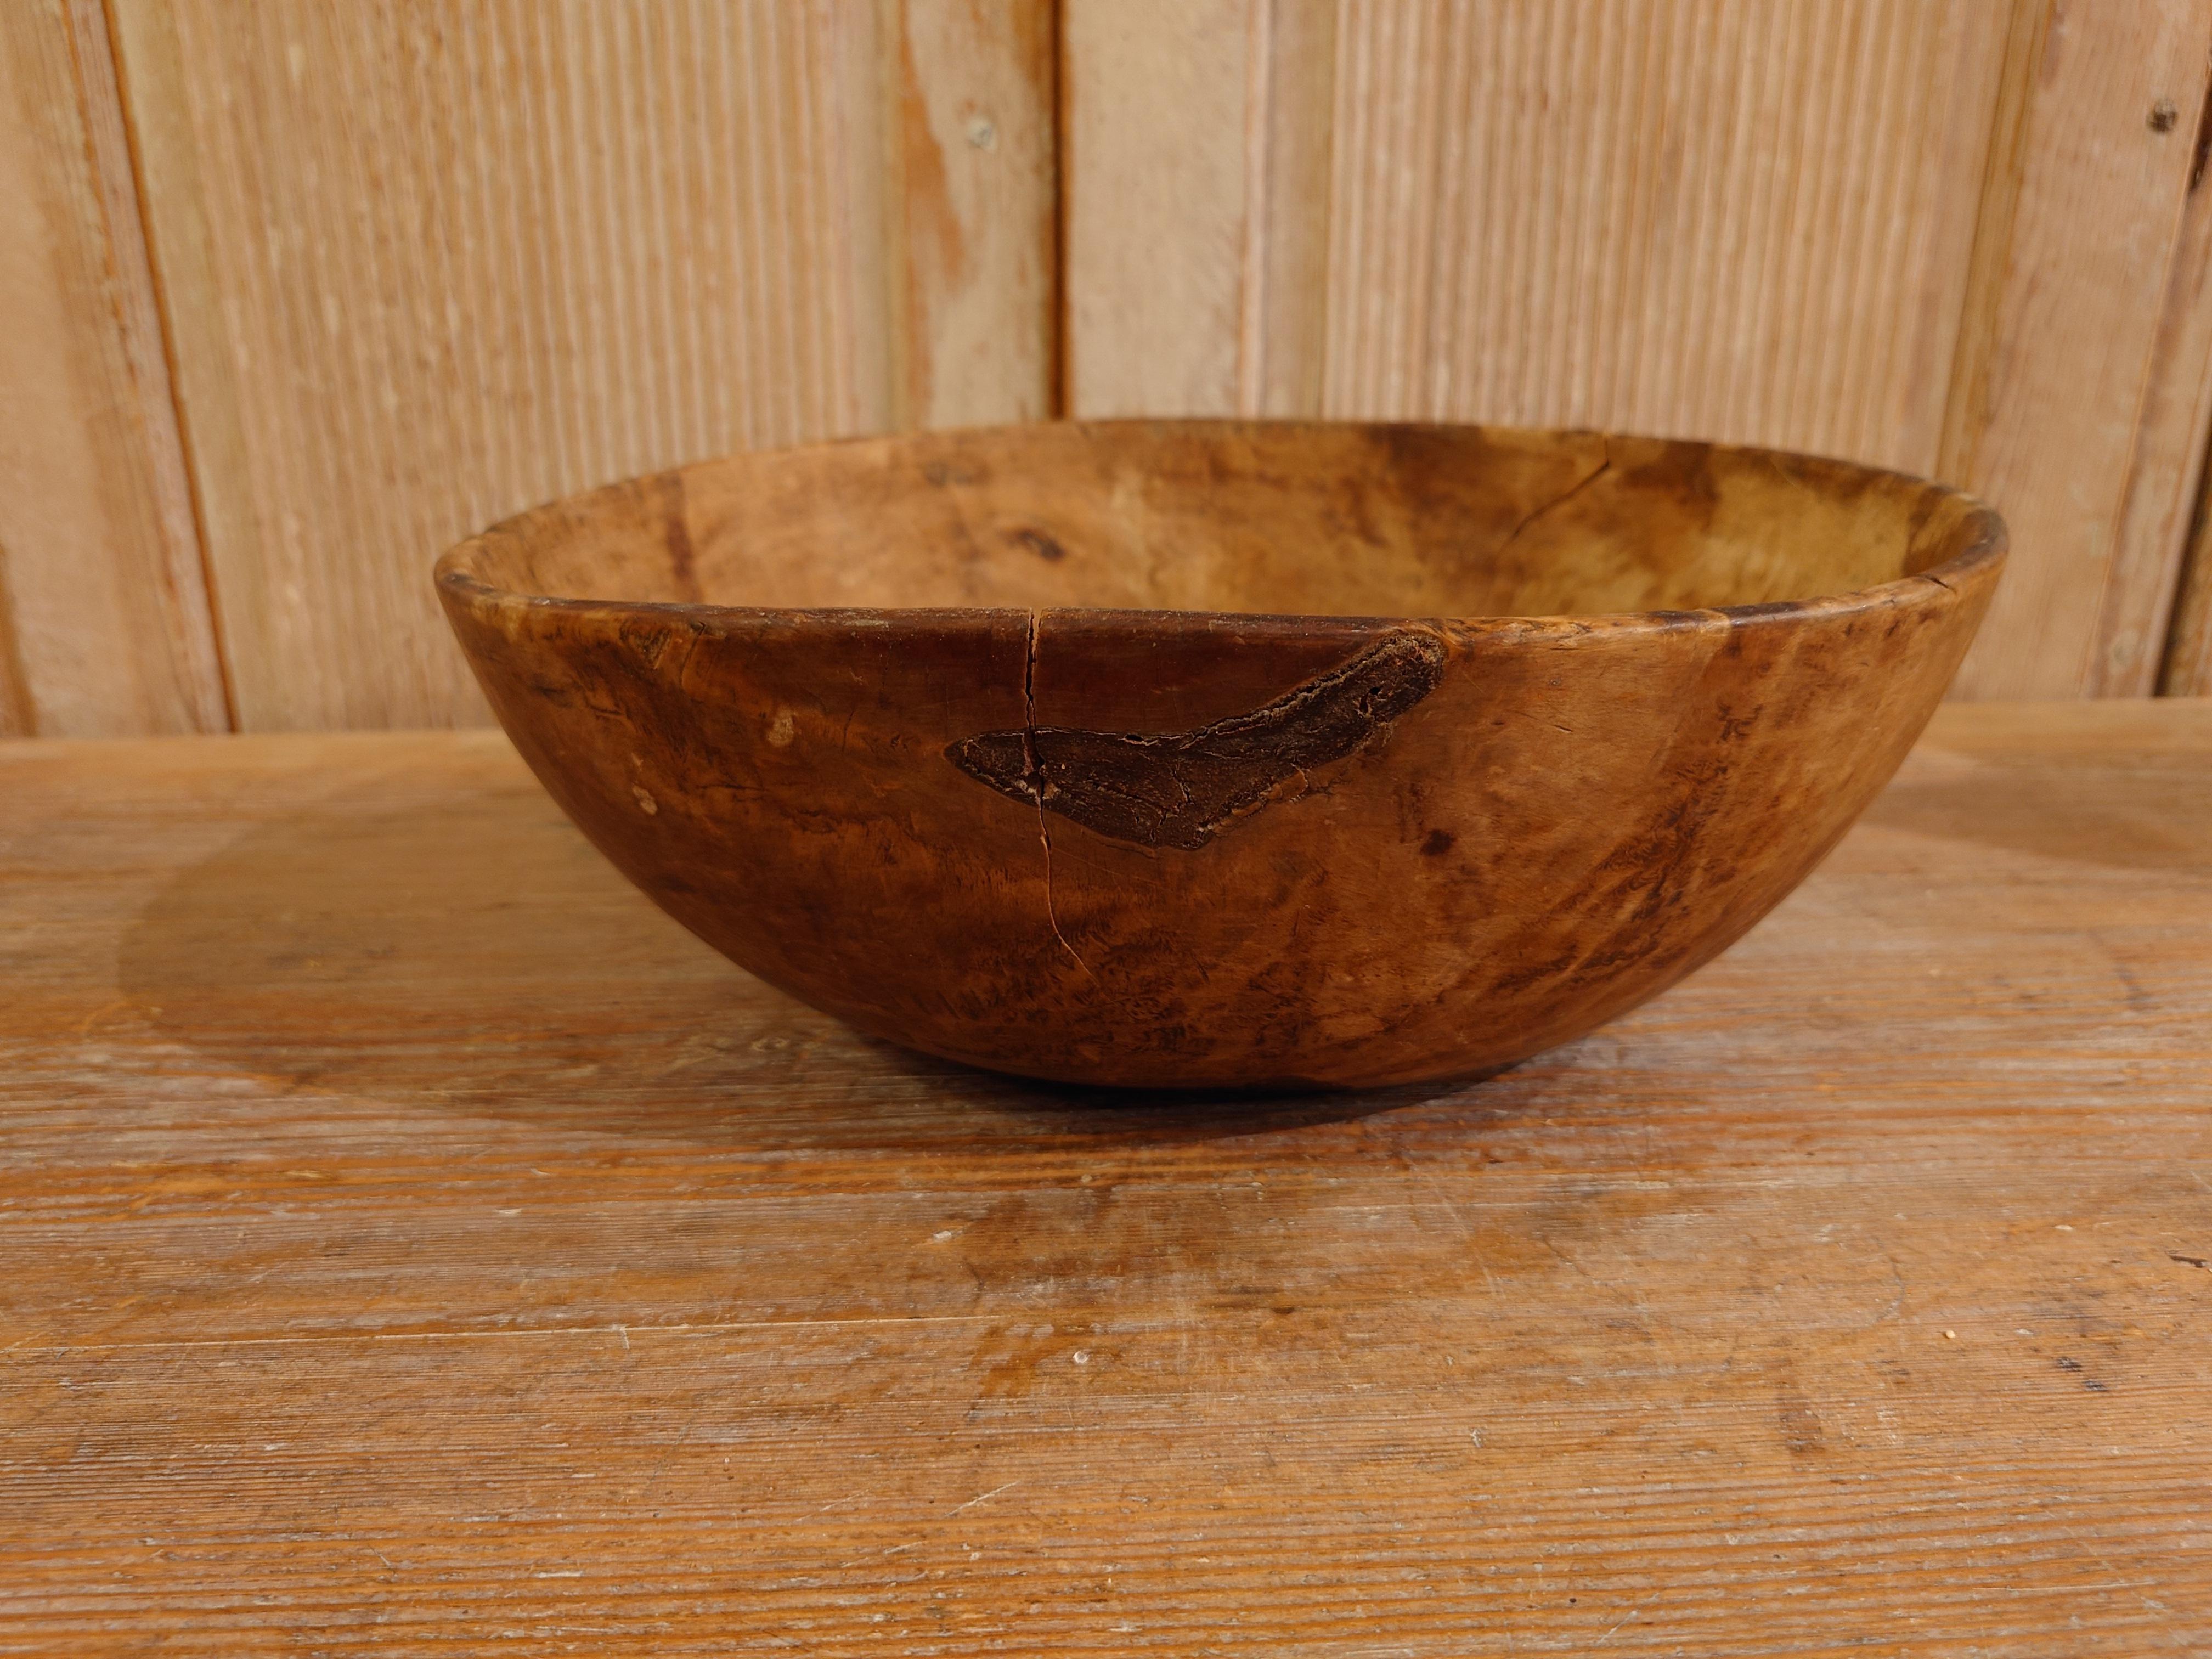 Late 19th century Swedish antique rustic wooden bowl from Northern Sweden.
Genuine & rustic with incredible patina after several hundreds years of use.
So useful and incredible interior detail.
Drycracks occour.
The bowl is made in pine.
These